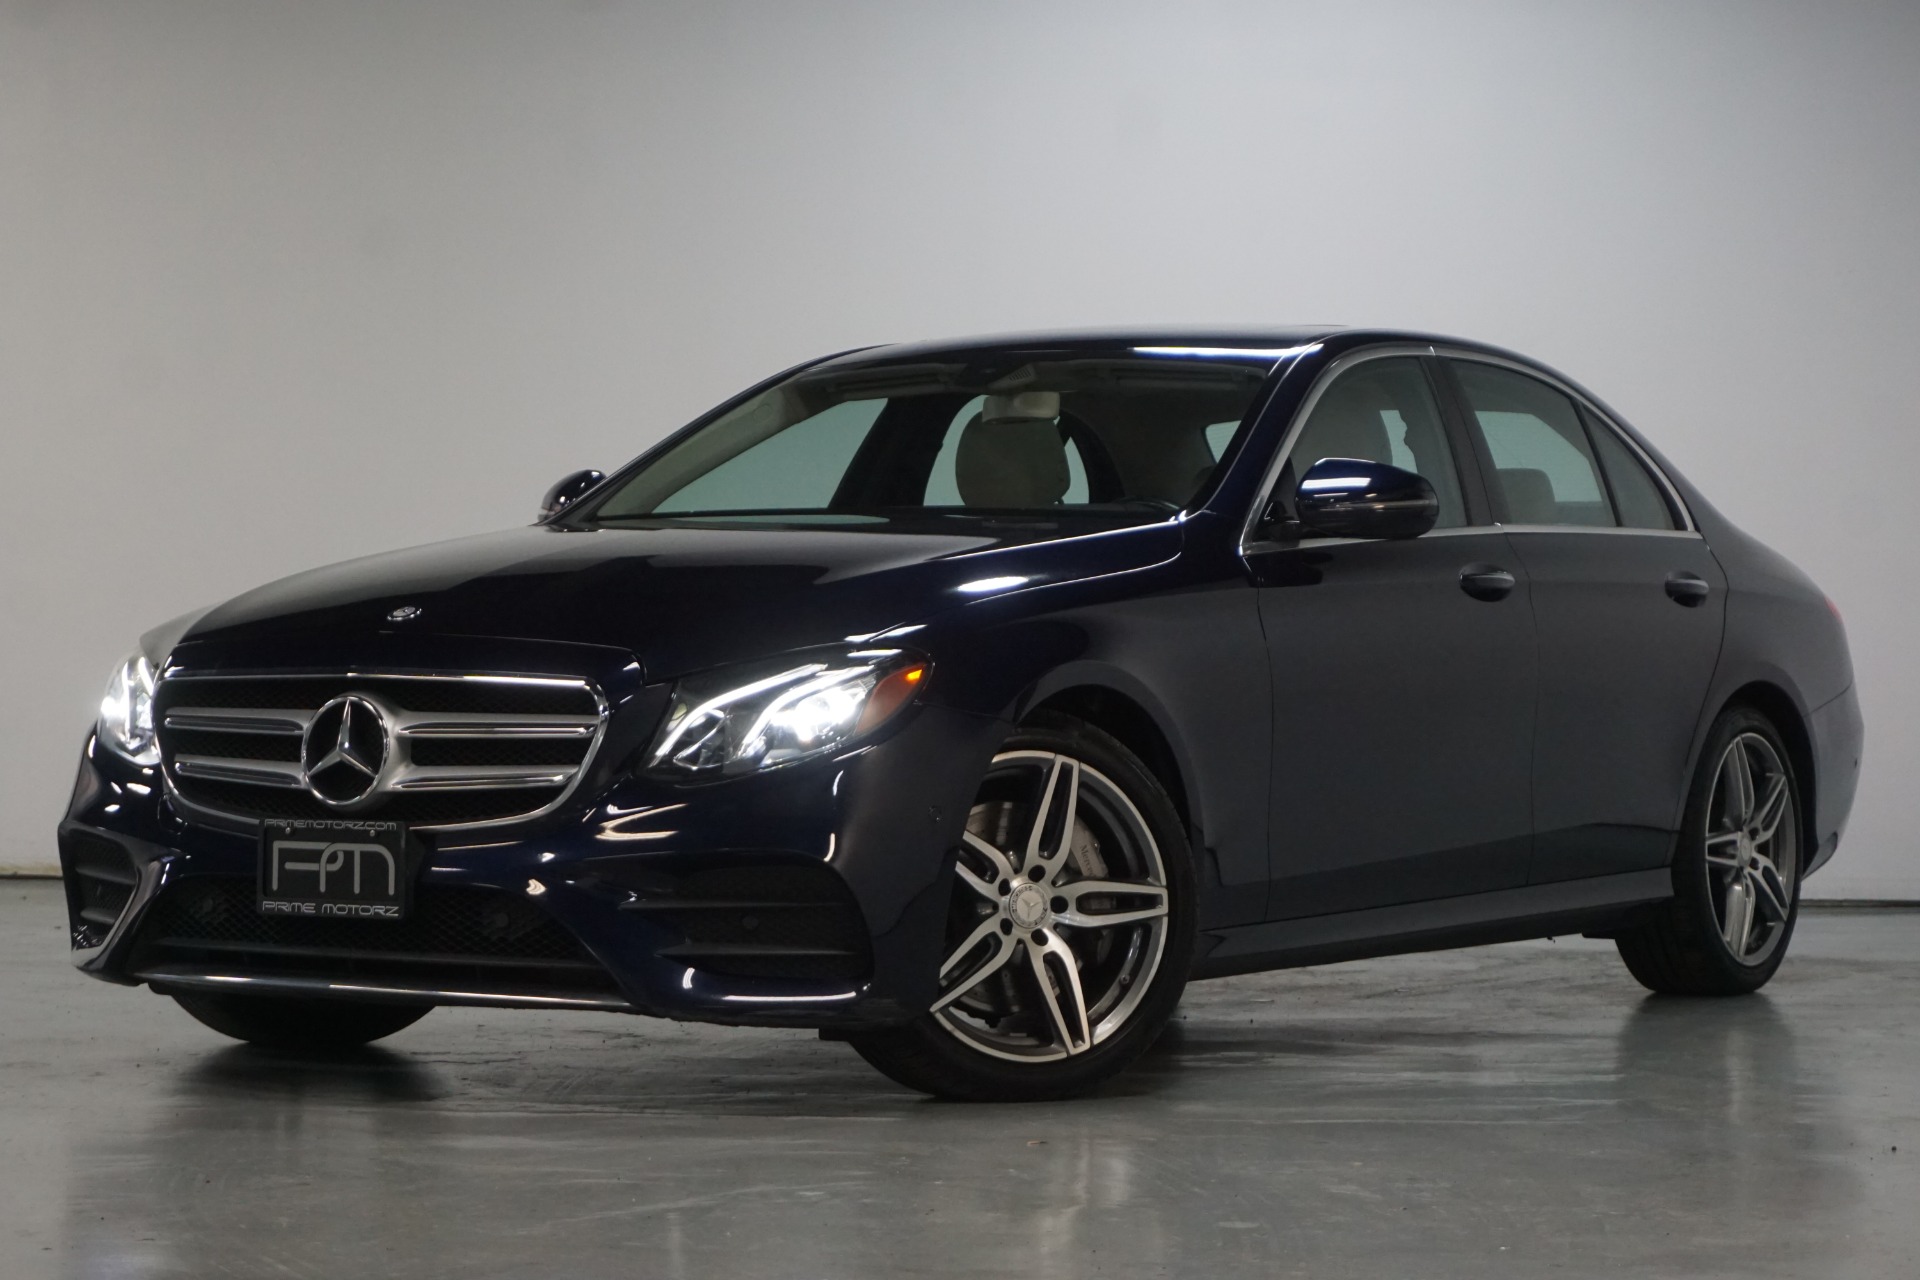 Used 17 Lunar Blue Metallic Mercedes Benz E Class 00 Awd E 300 4matic For Sale Sold Prime Motorz Stock 2650